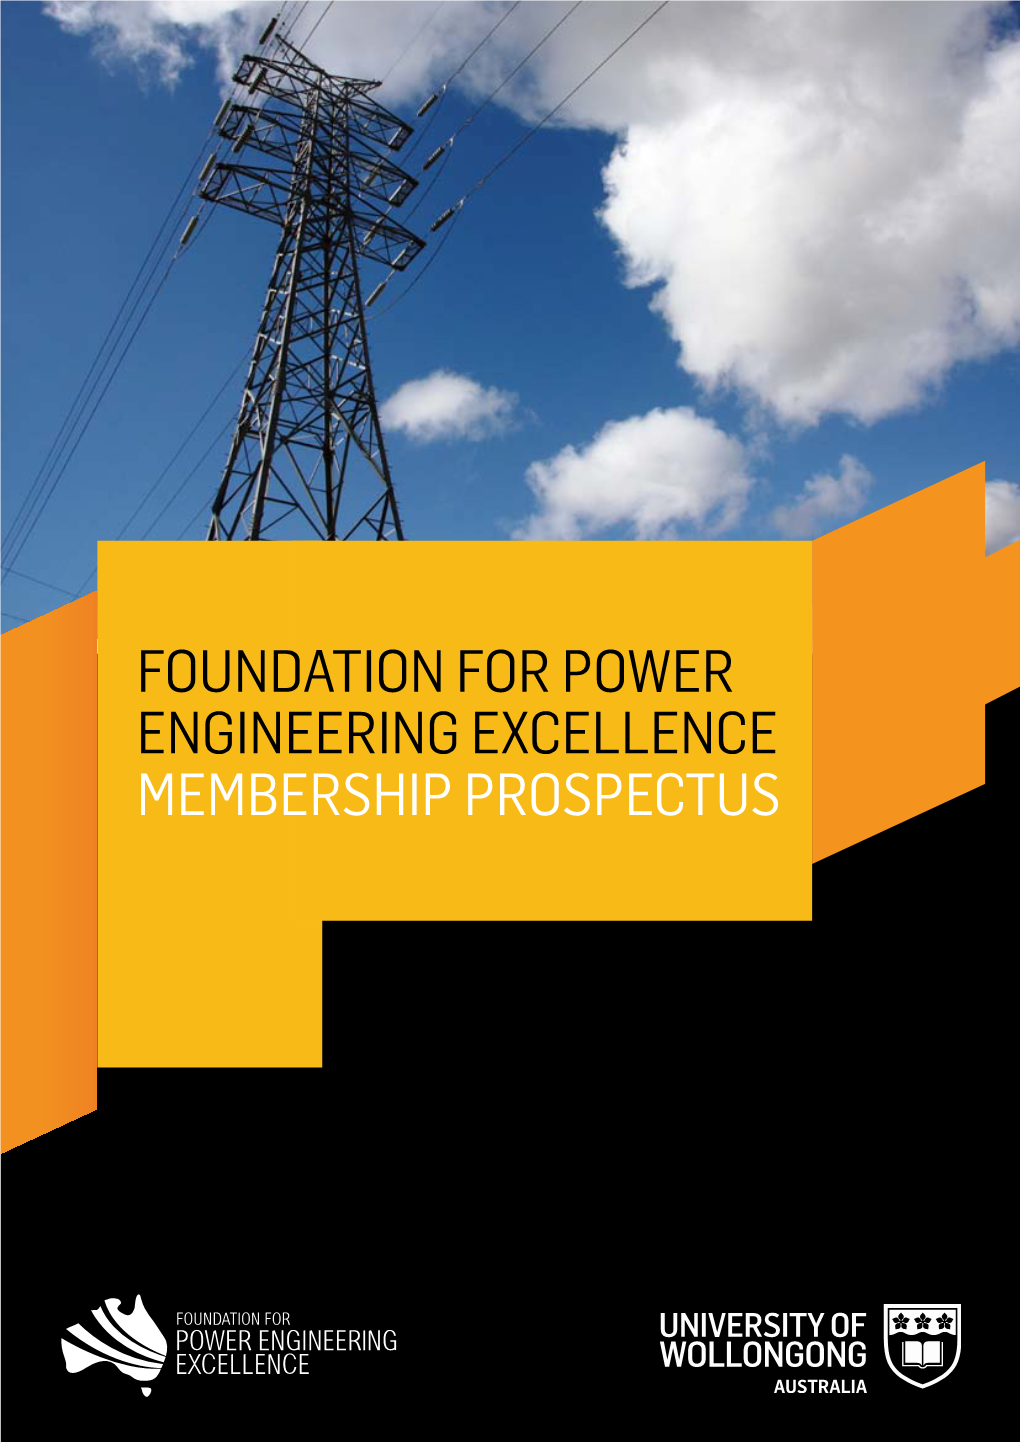 Foundation for Power Engineering Excellence Membership Prospectus Mission Statement